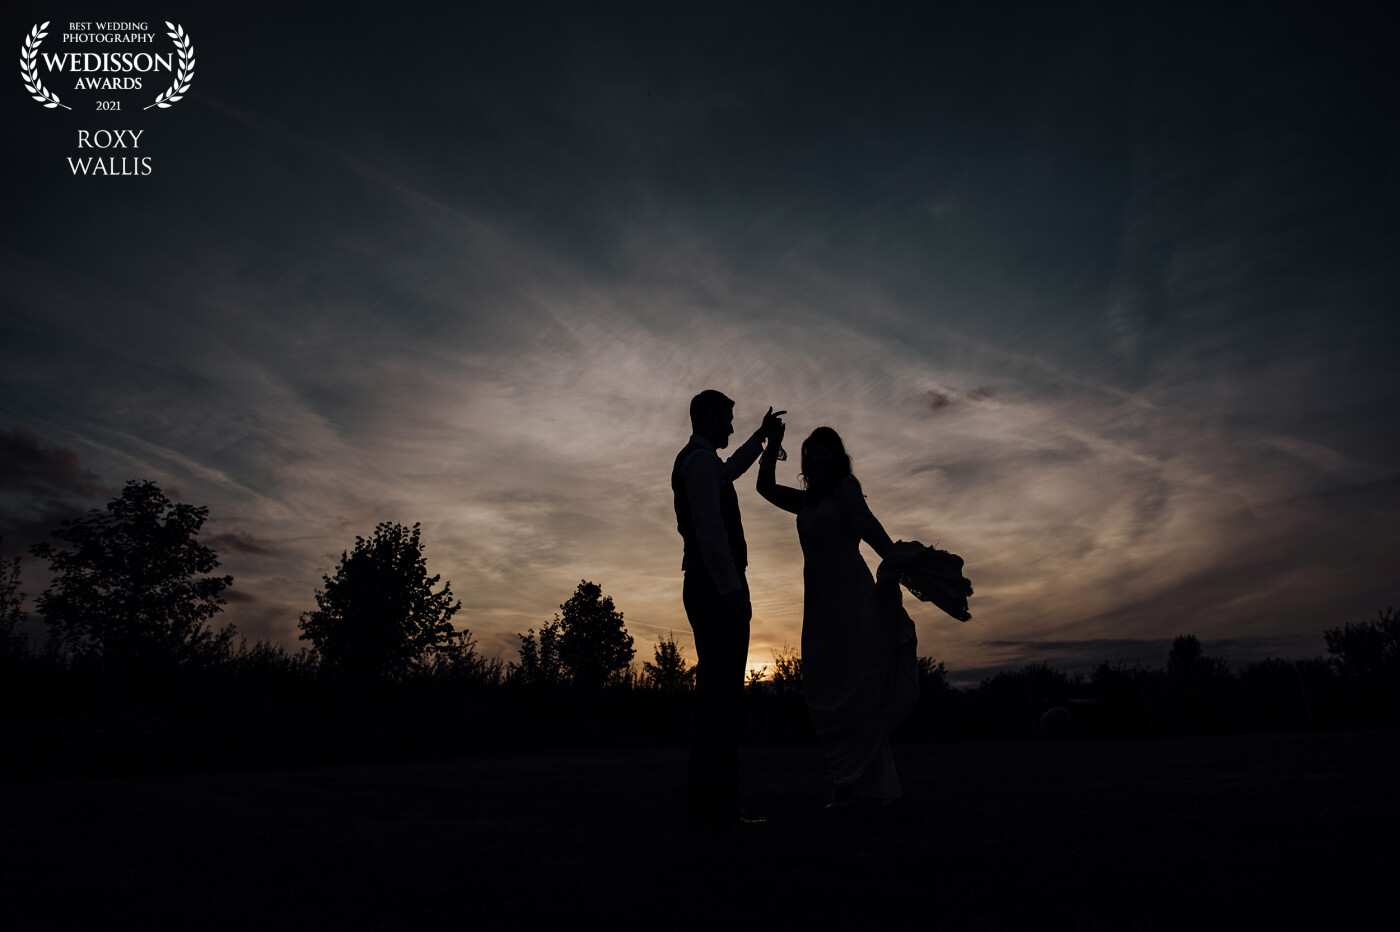 The skies may have started off cloudy at this wedding but the evening rewarded us with this glowing and dramatic sunset. <br />
I managed to capture some twirls in front of the setting sun to add some interest and movement to their silhouette.